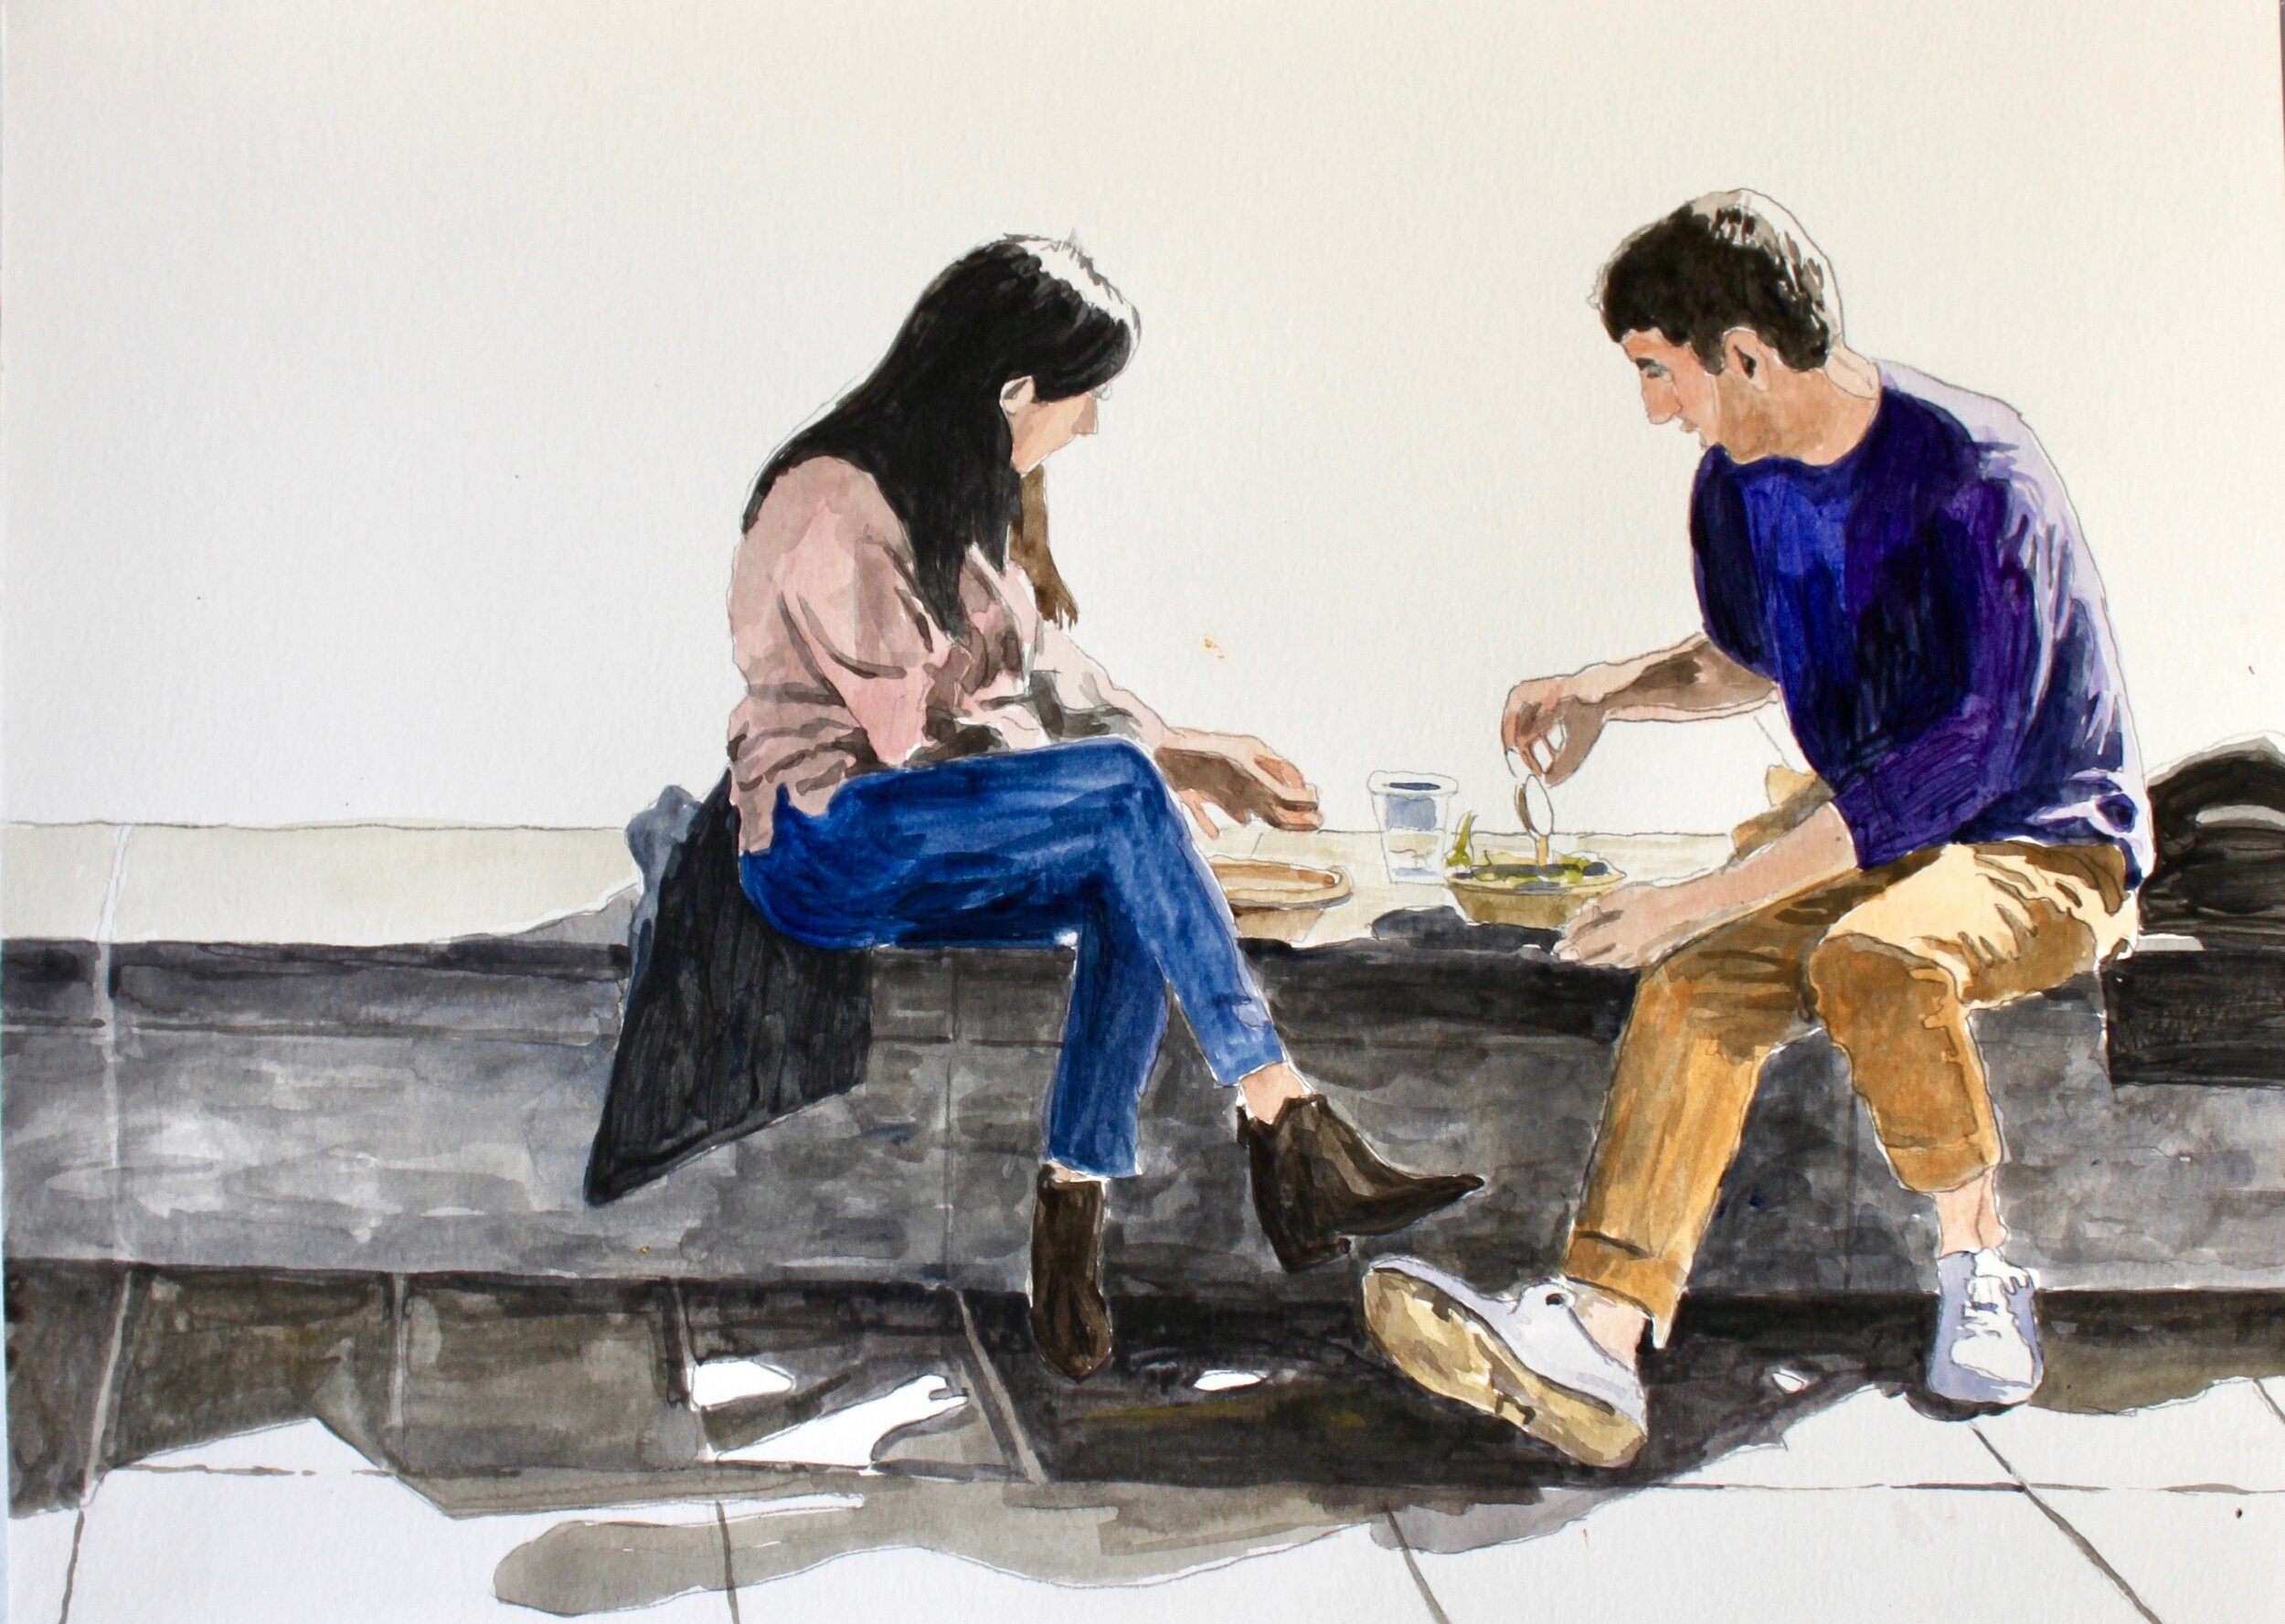 Untitled, People Eating Lunch, 11 x 15, acrylic on paper